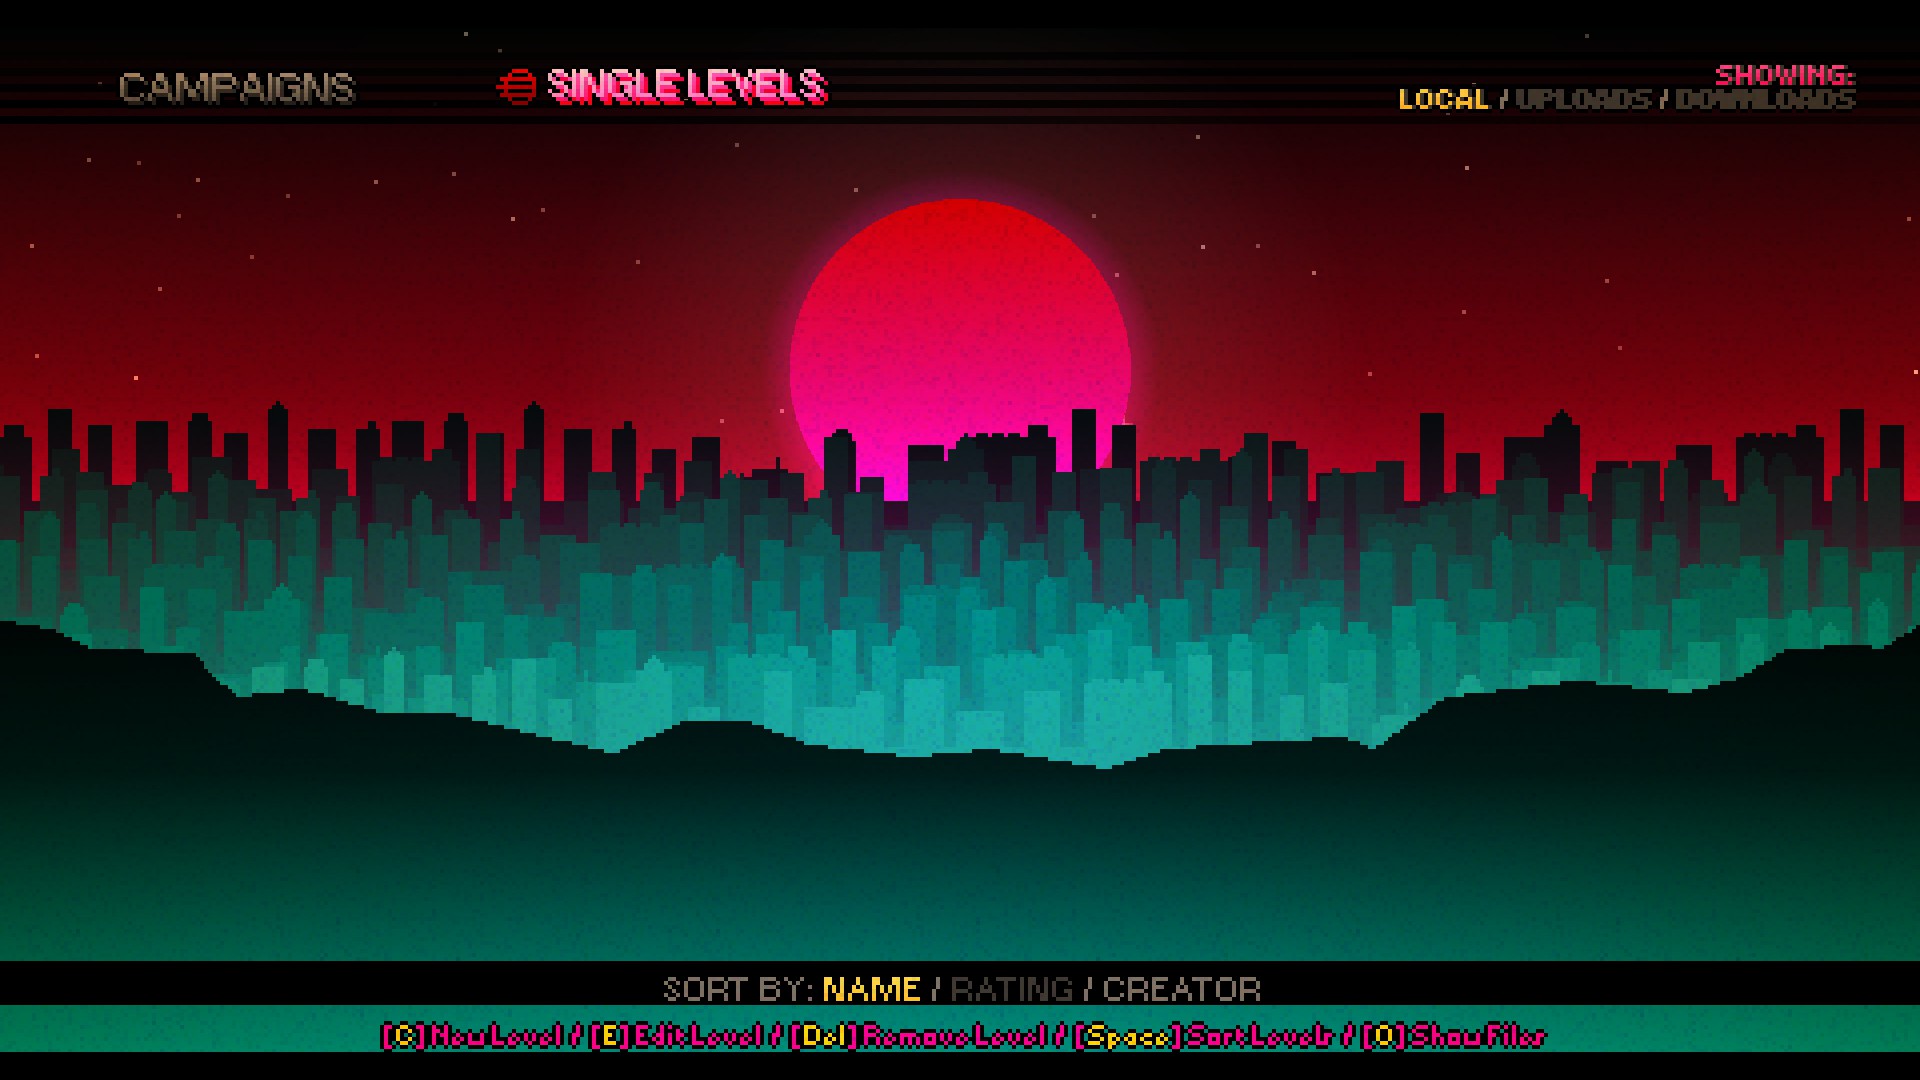 how to reload in hotline miami